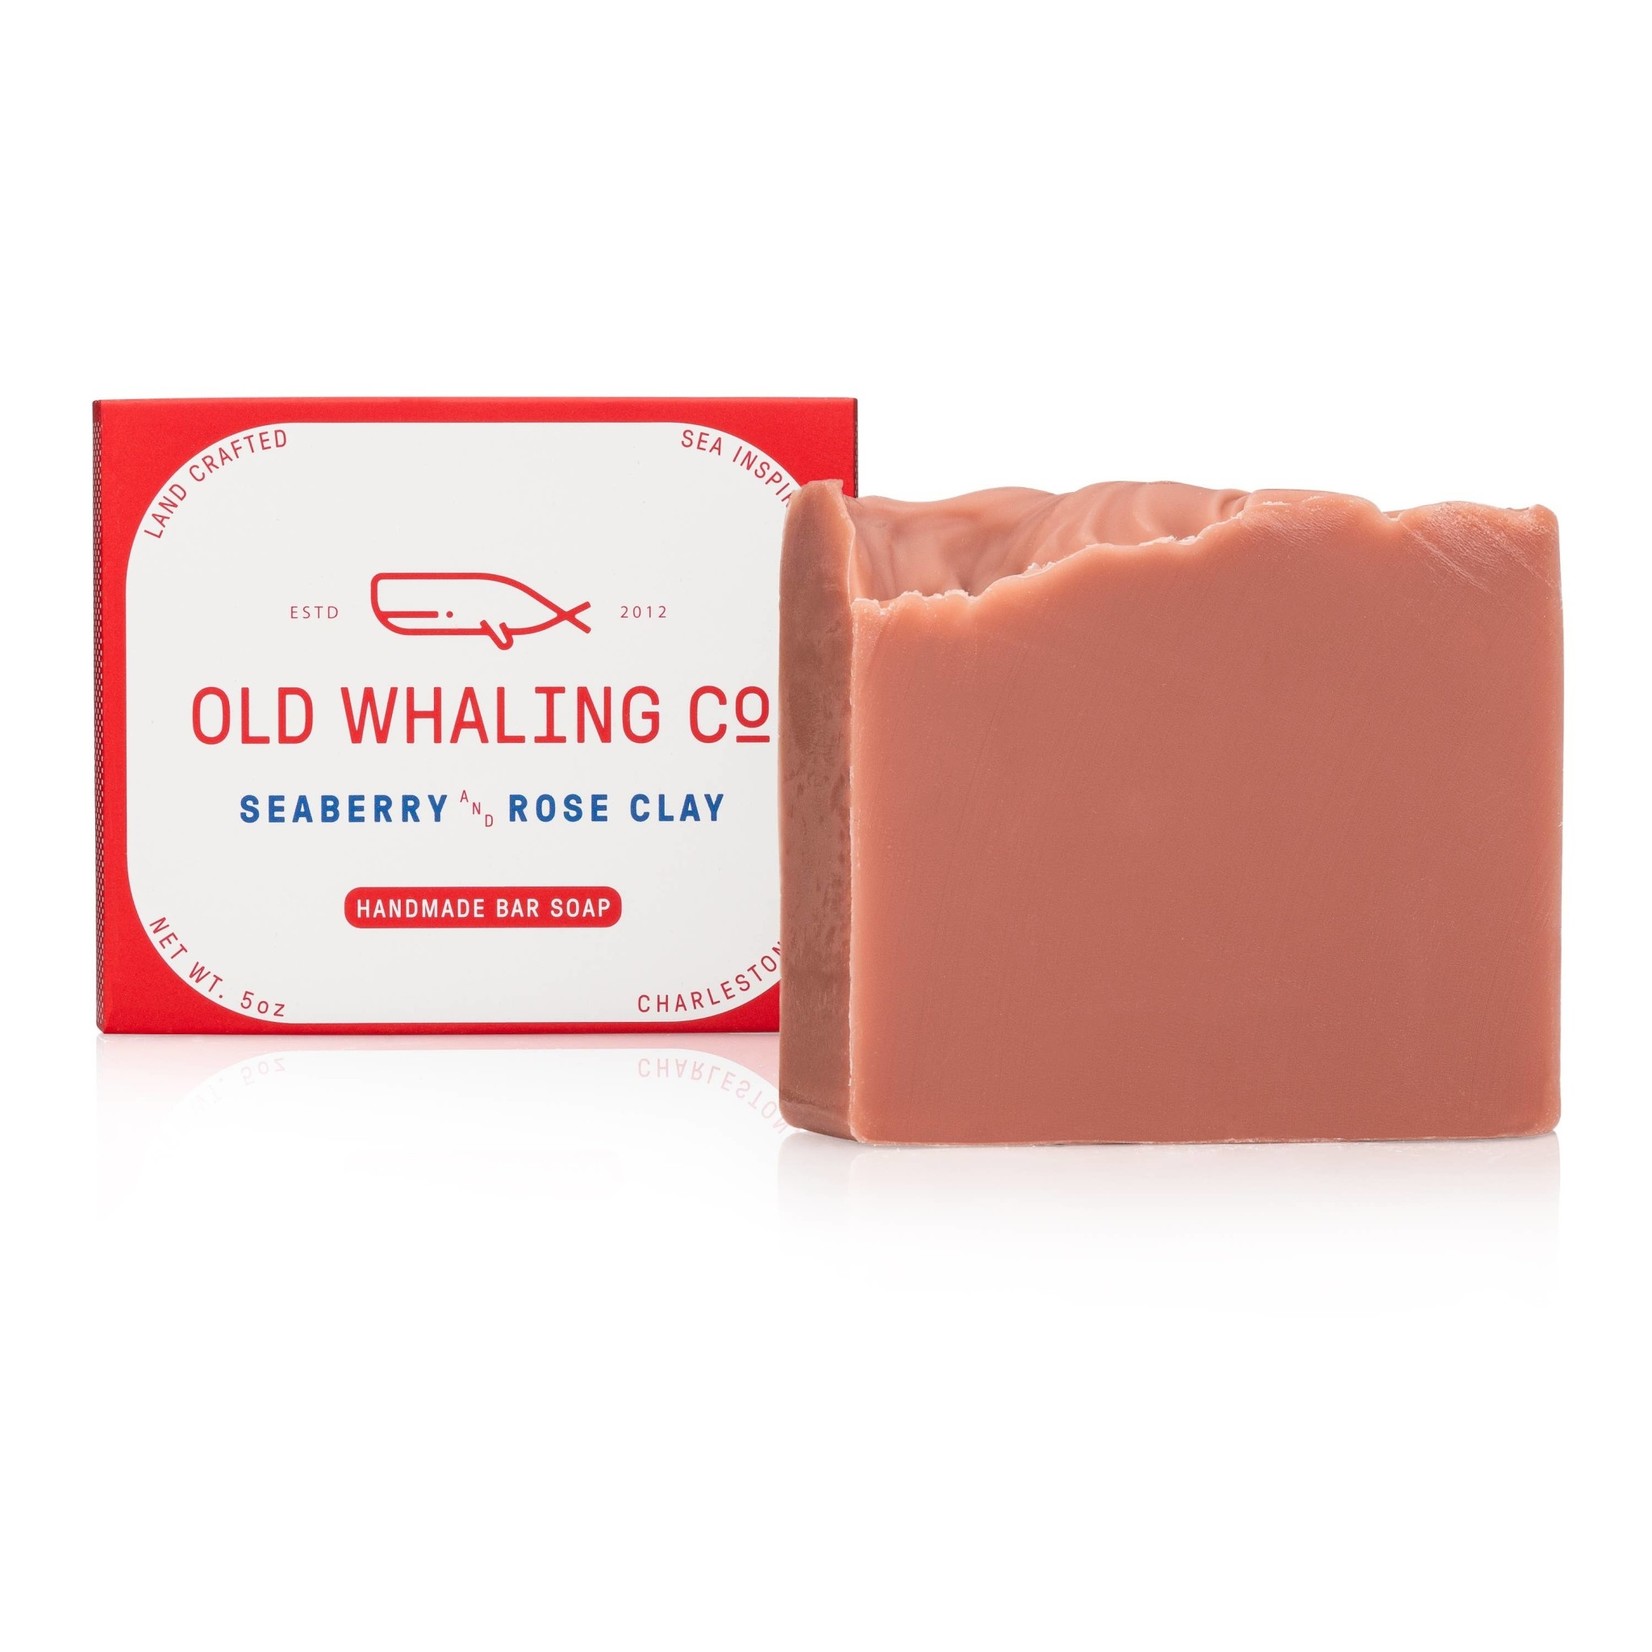 Old Whaling Company Old Whaling Company Bar Soap